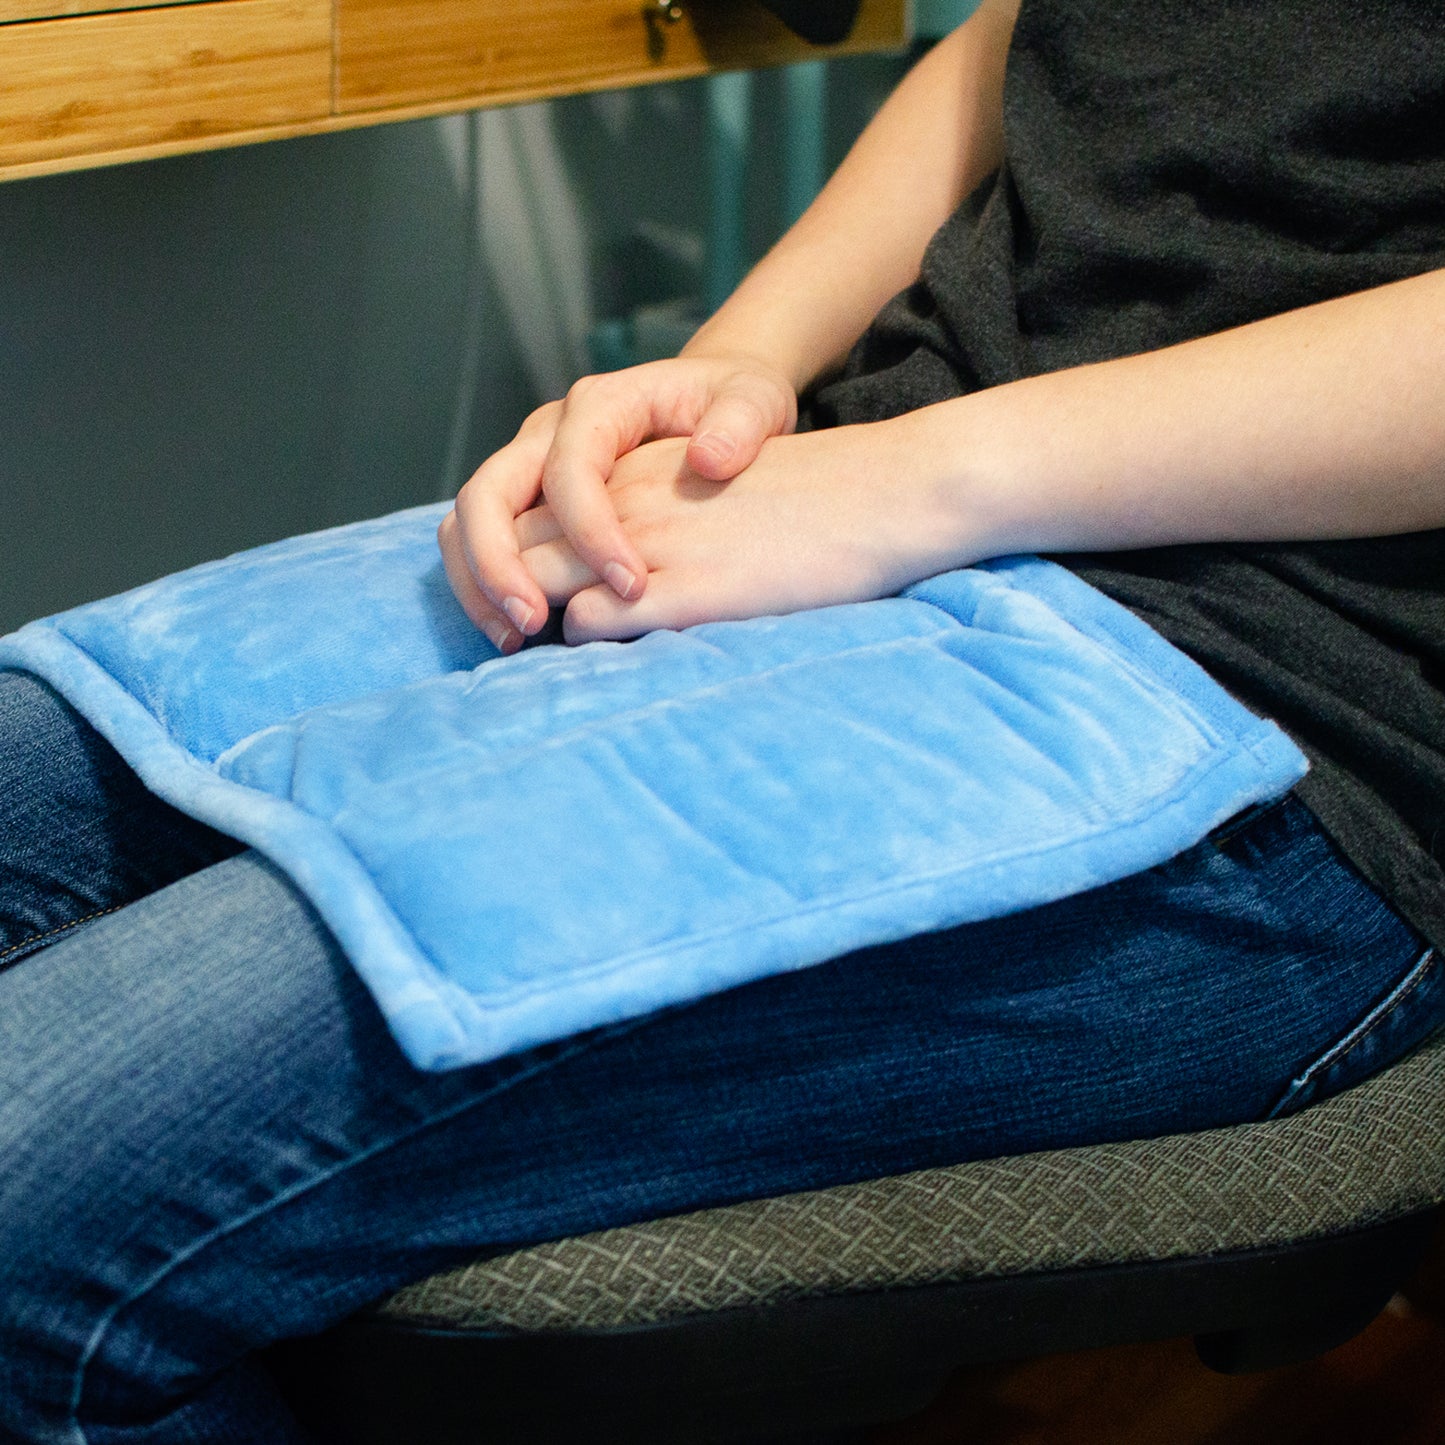 Weighted Lap Pad - Blue - 3 Pound